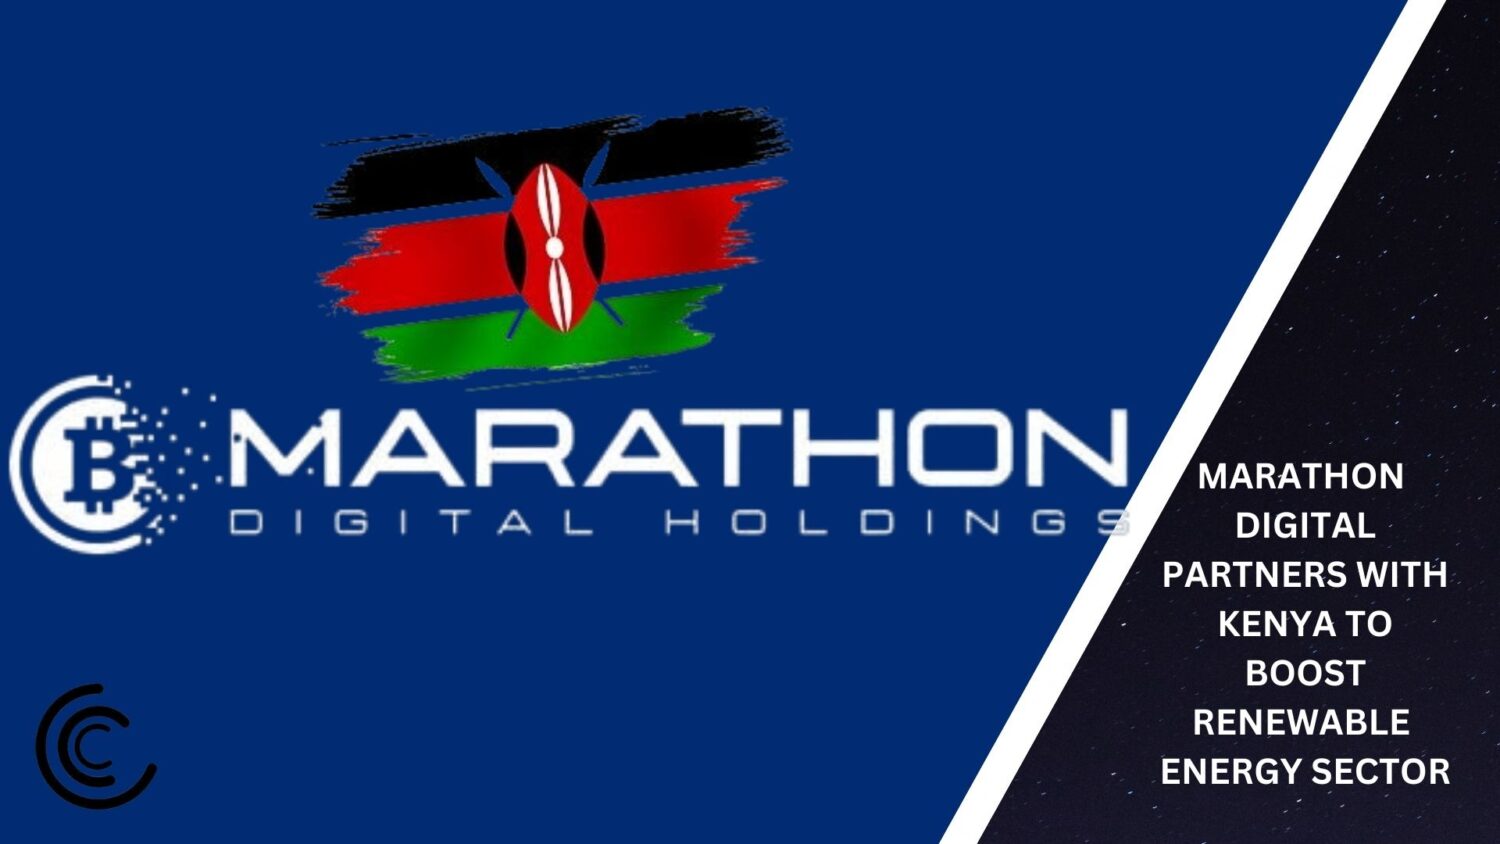 Marathon Digital Partners With Kenya'S Ministry Of Energy To Boost Renewable Energy Sector